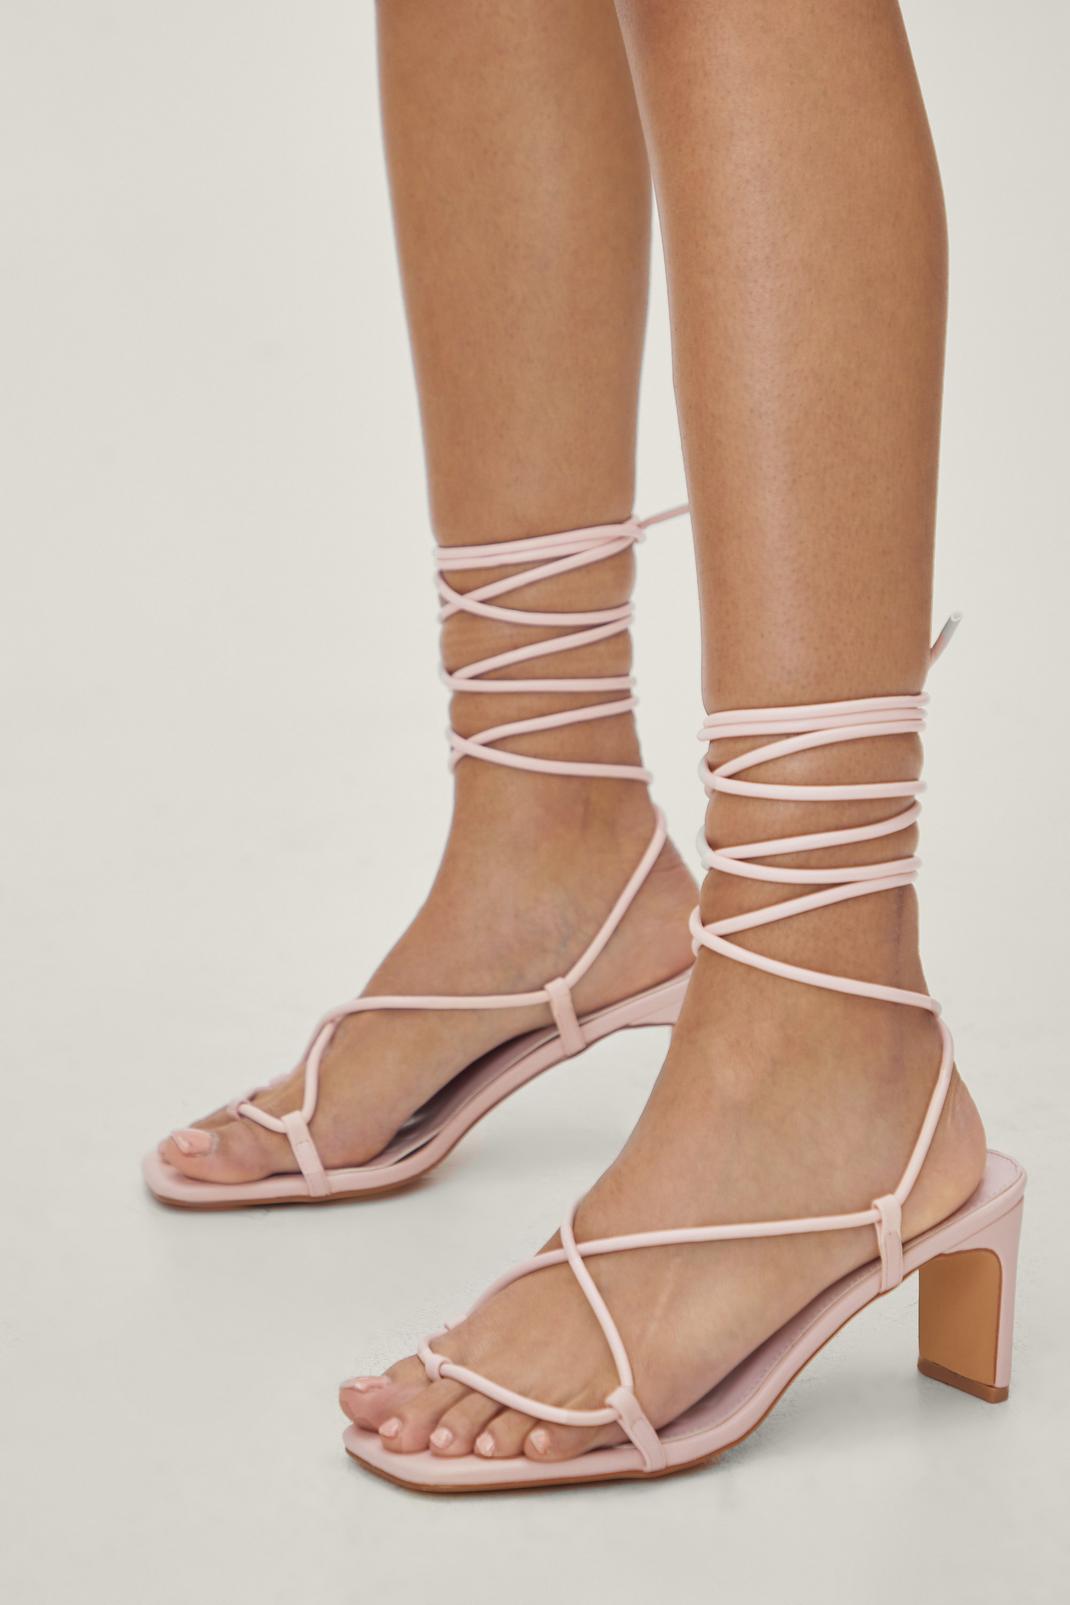 Faux Leather Strappy Low Heels | Nasty Gal
 